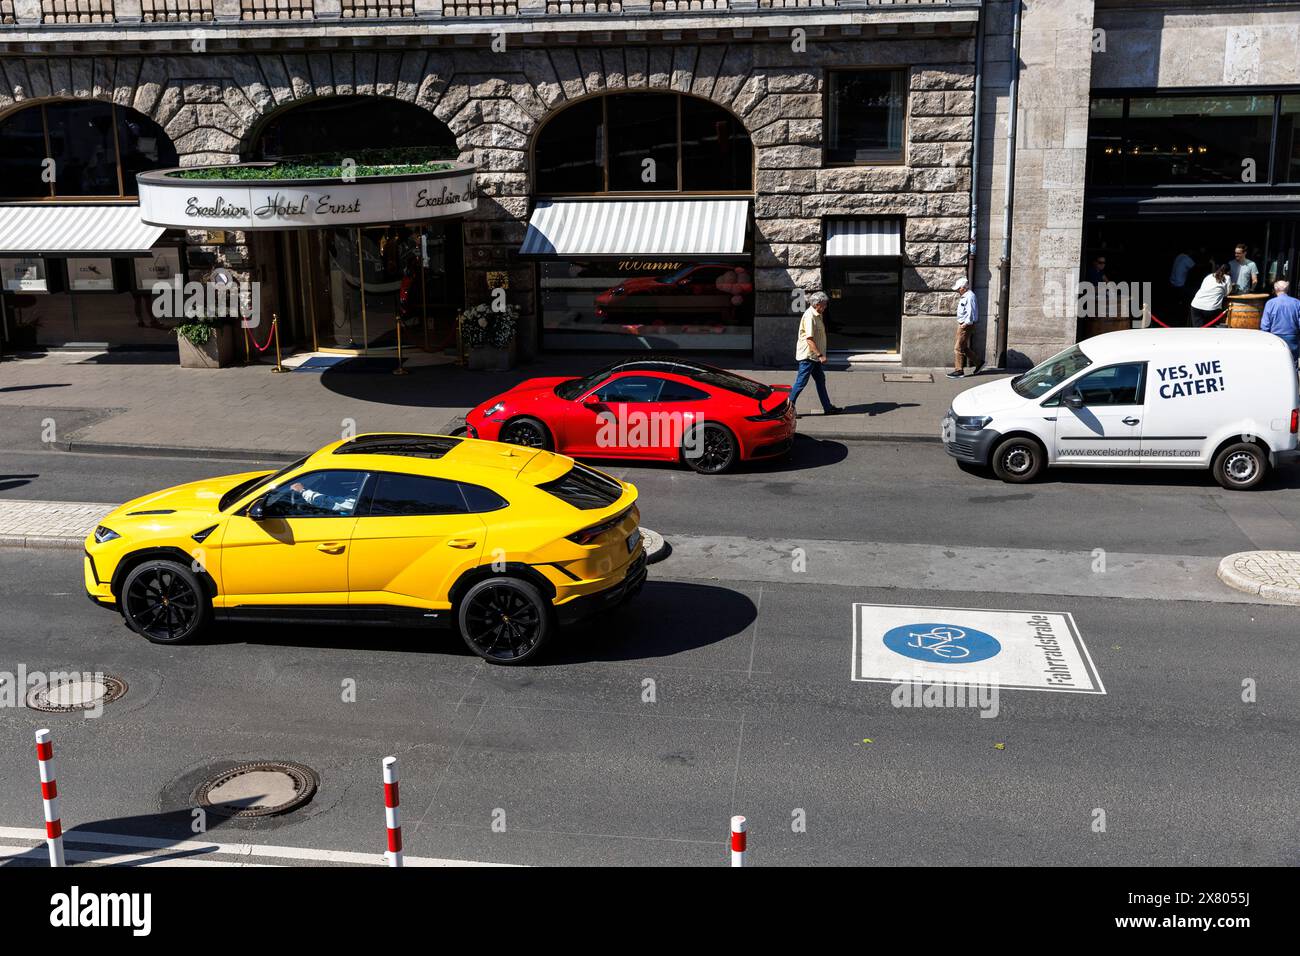 a Porsche 911 and a Lamborghini Urus stand in front of the of the Excelsior Hotel Ernst, Cologne, Germany ein Porsche 911 und ein Lamborghini Urus ste Stock Photo